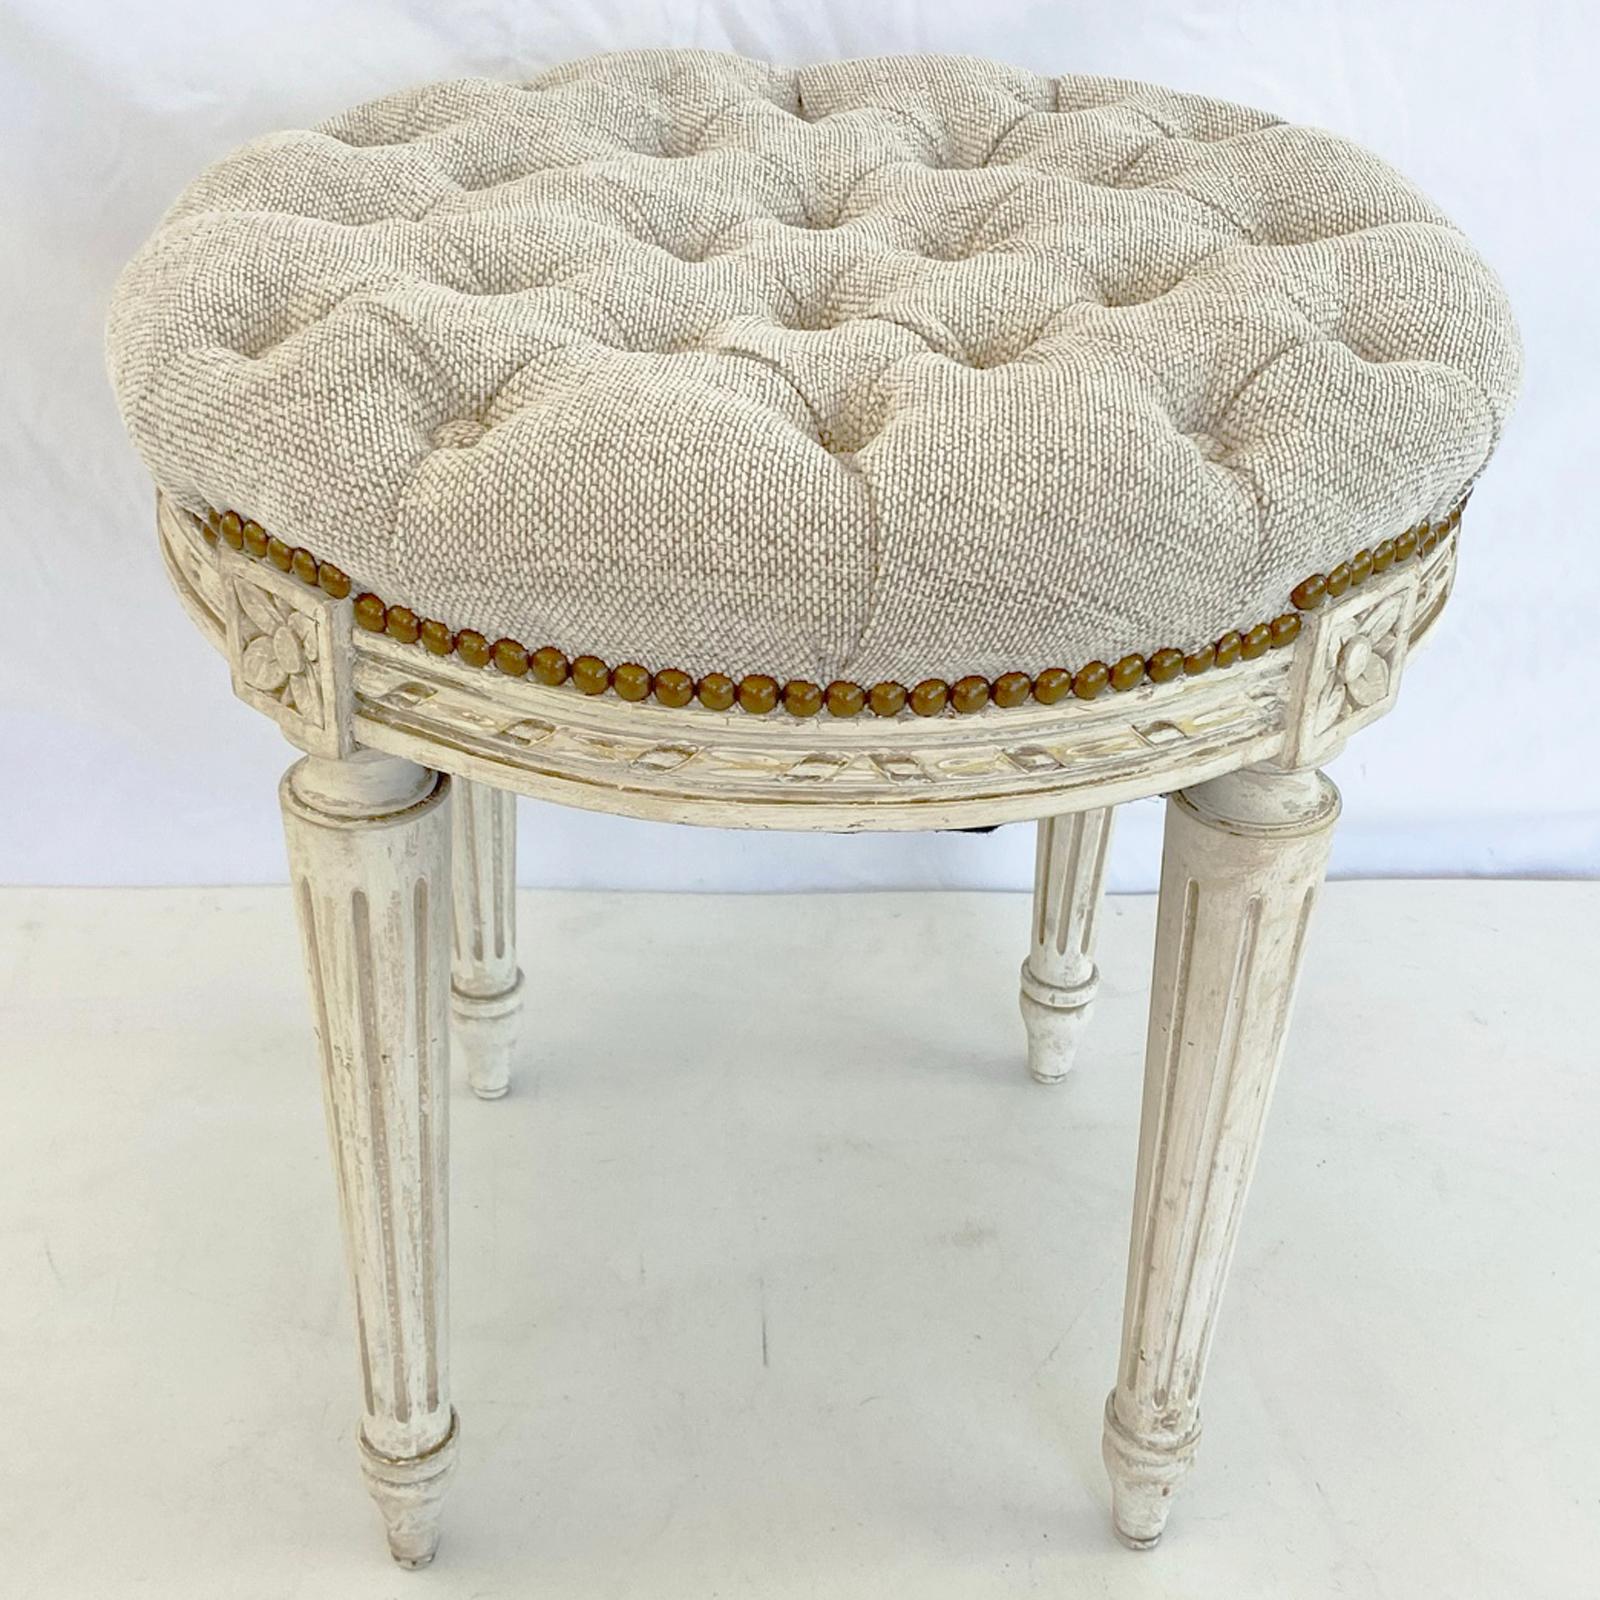 Round stool, having a tufted crown seat upholstered in twill fabric with nailheads, on a painted base, its apron carved with ribbon gadrooning, rosette-blocks over four round, tapering, fluted legs, ending in touipe feet. 

Stock ID: D3050.